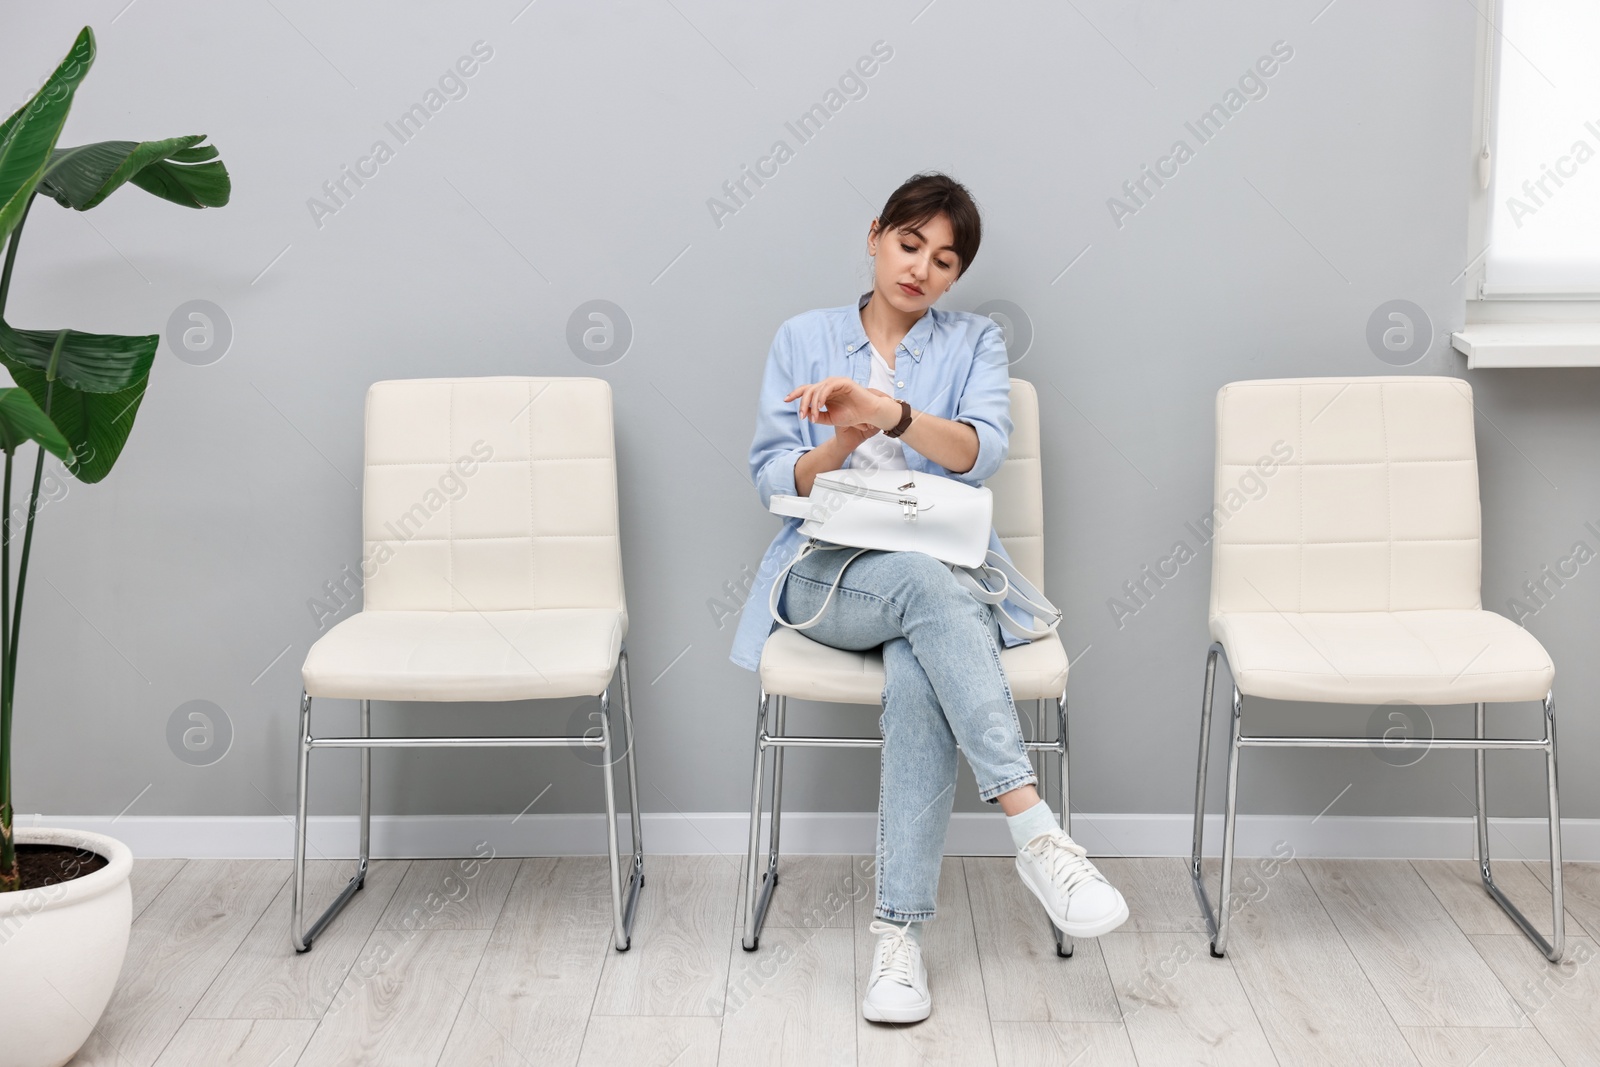 Photo of Woman looking at wrist watch and waiting for appointment indoors